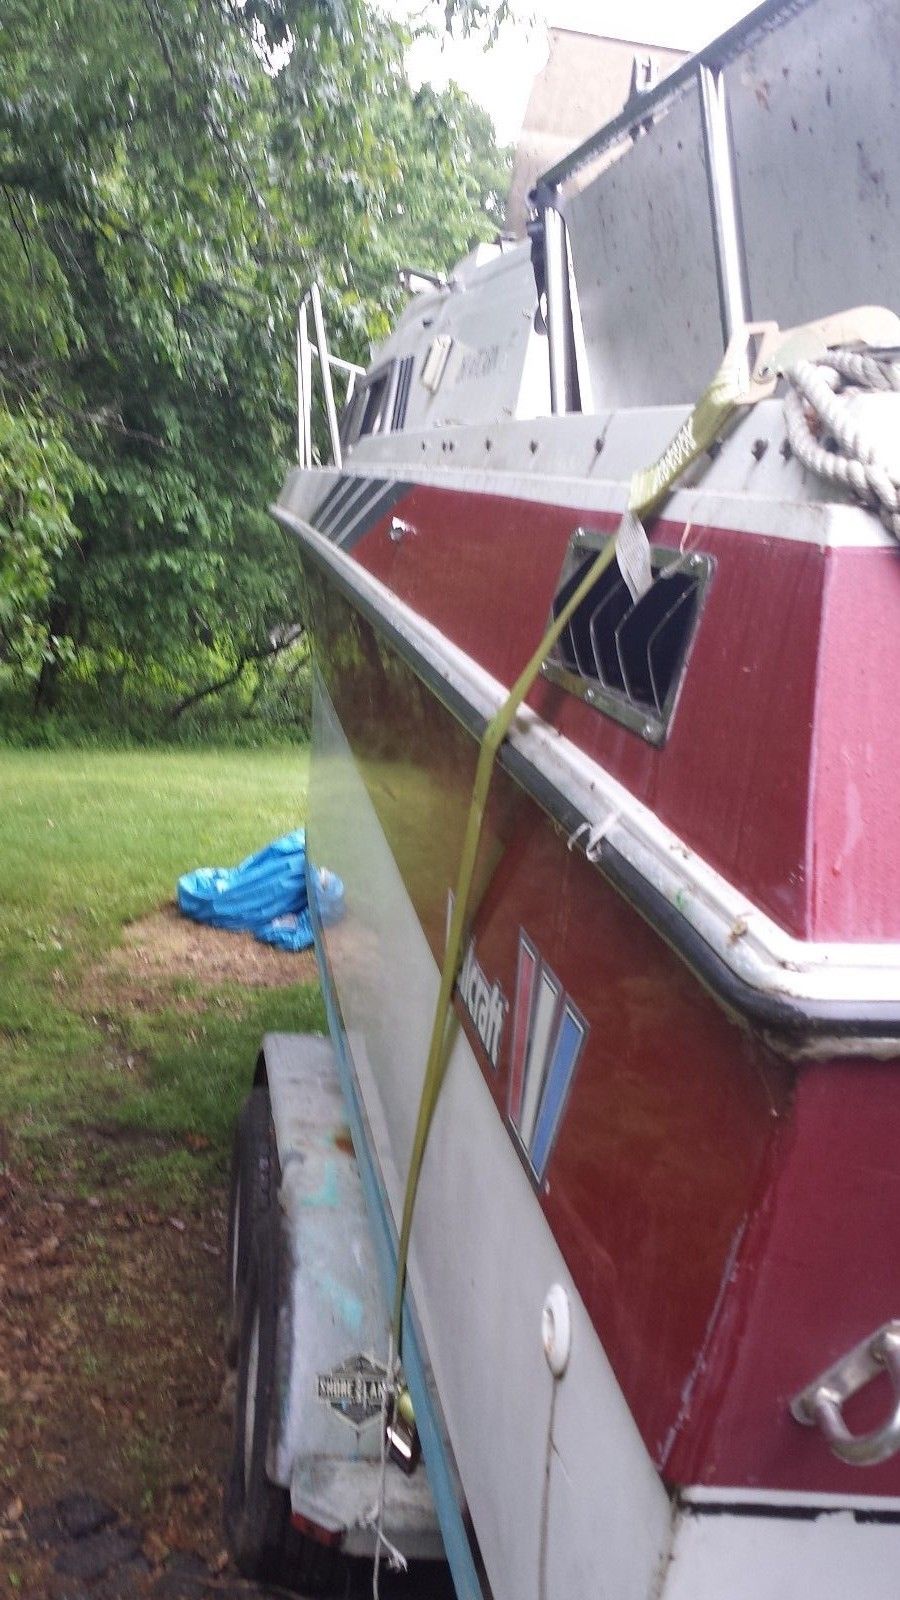 wellcraft 260 aft cabin 1984 for sale for $255 - boats